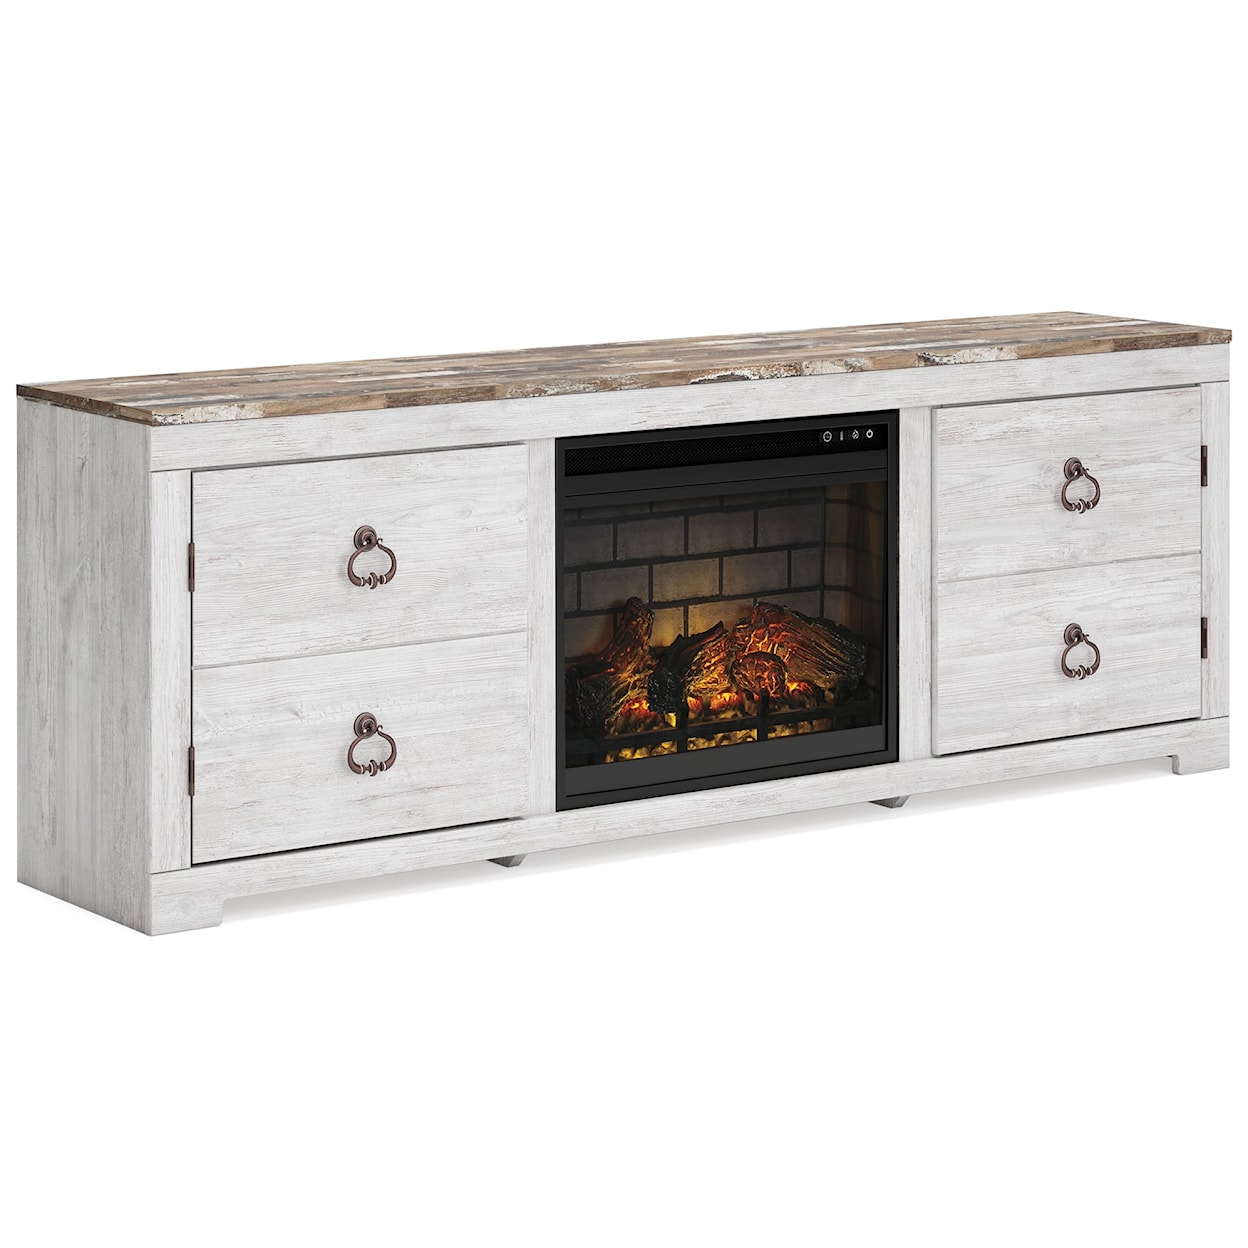 Ashley Furniture Signature Design Willowton 72" TV Stand with Electric Fireplace